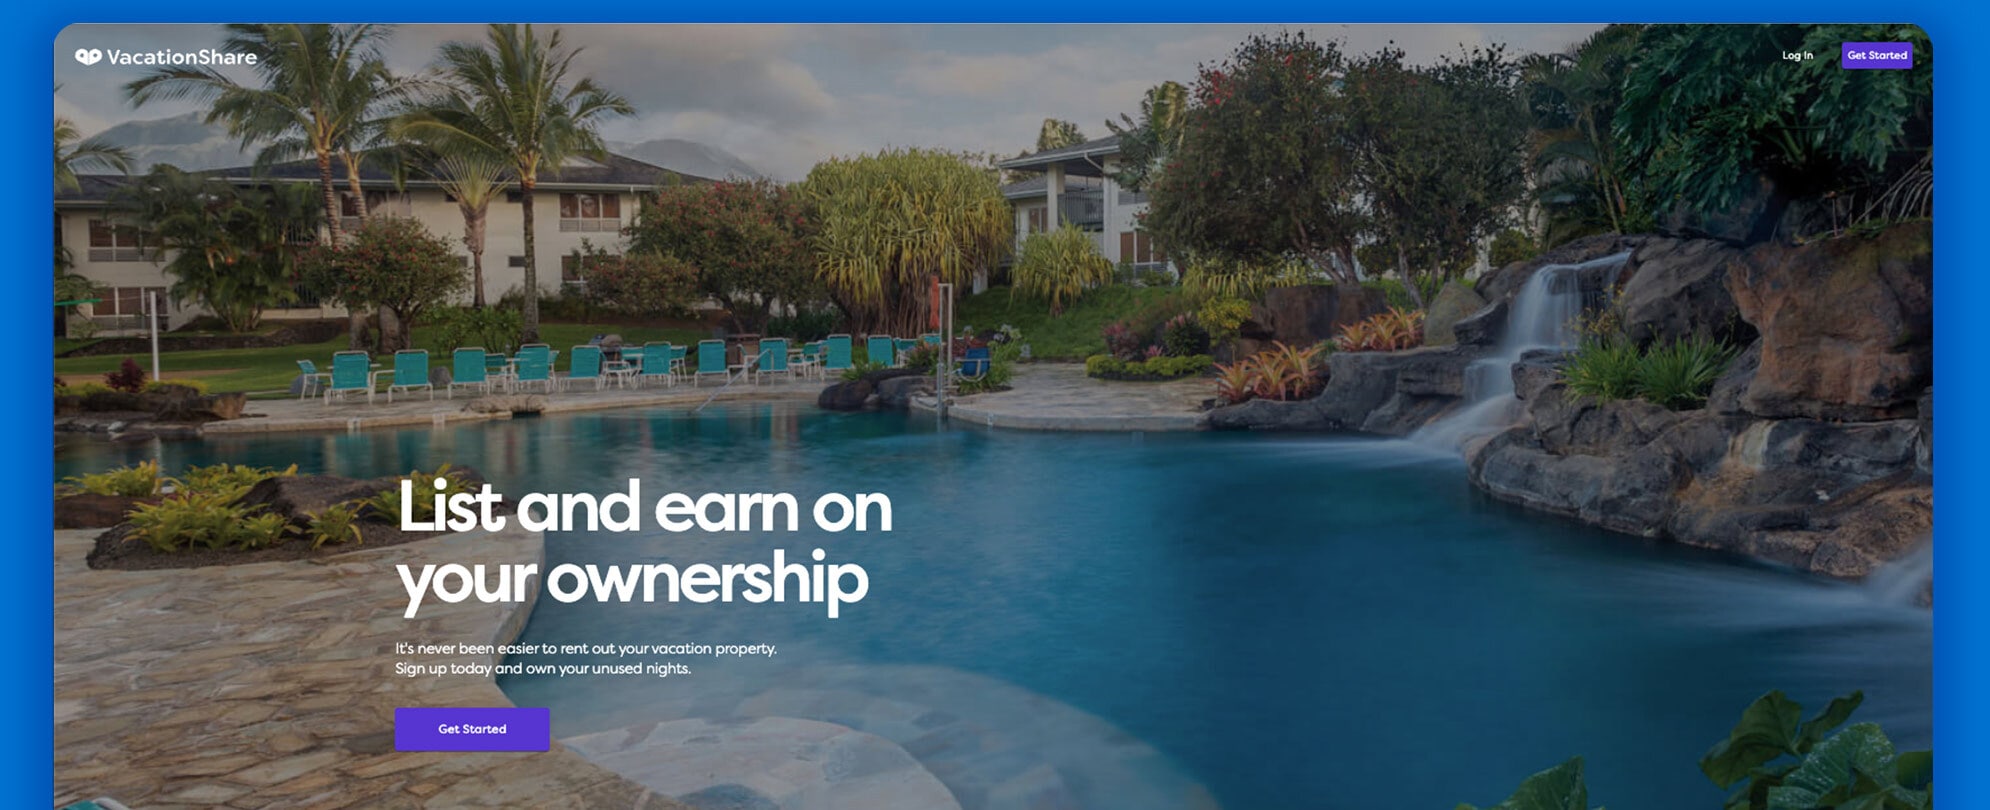 Hero image of the VacationShare website with text overlaid on a photo of a resort pool, on a blue background